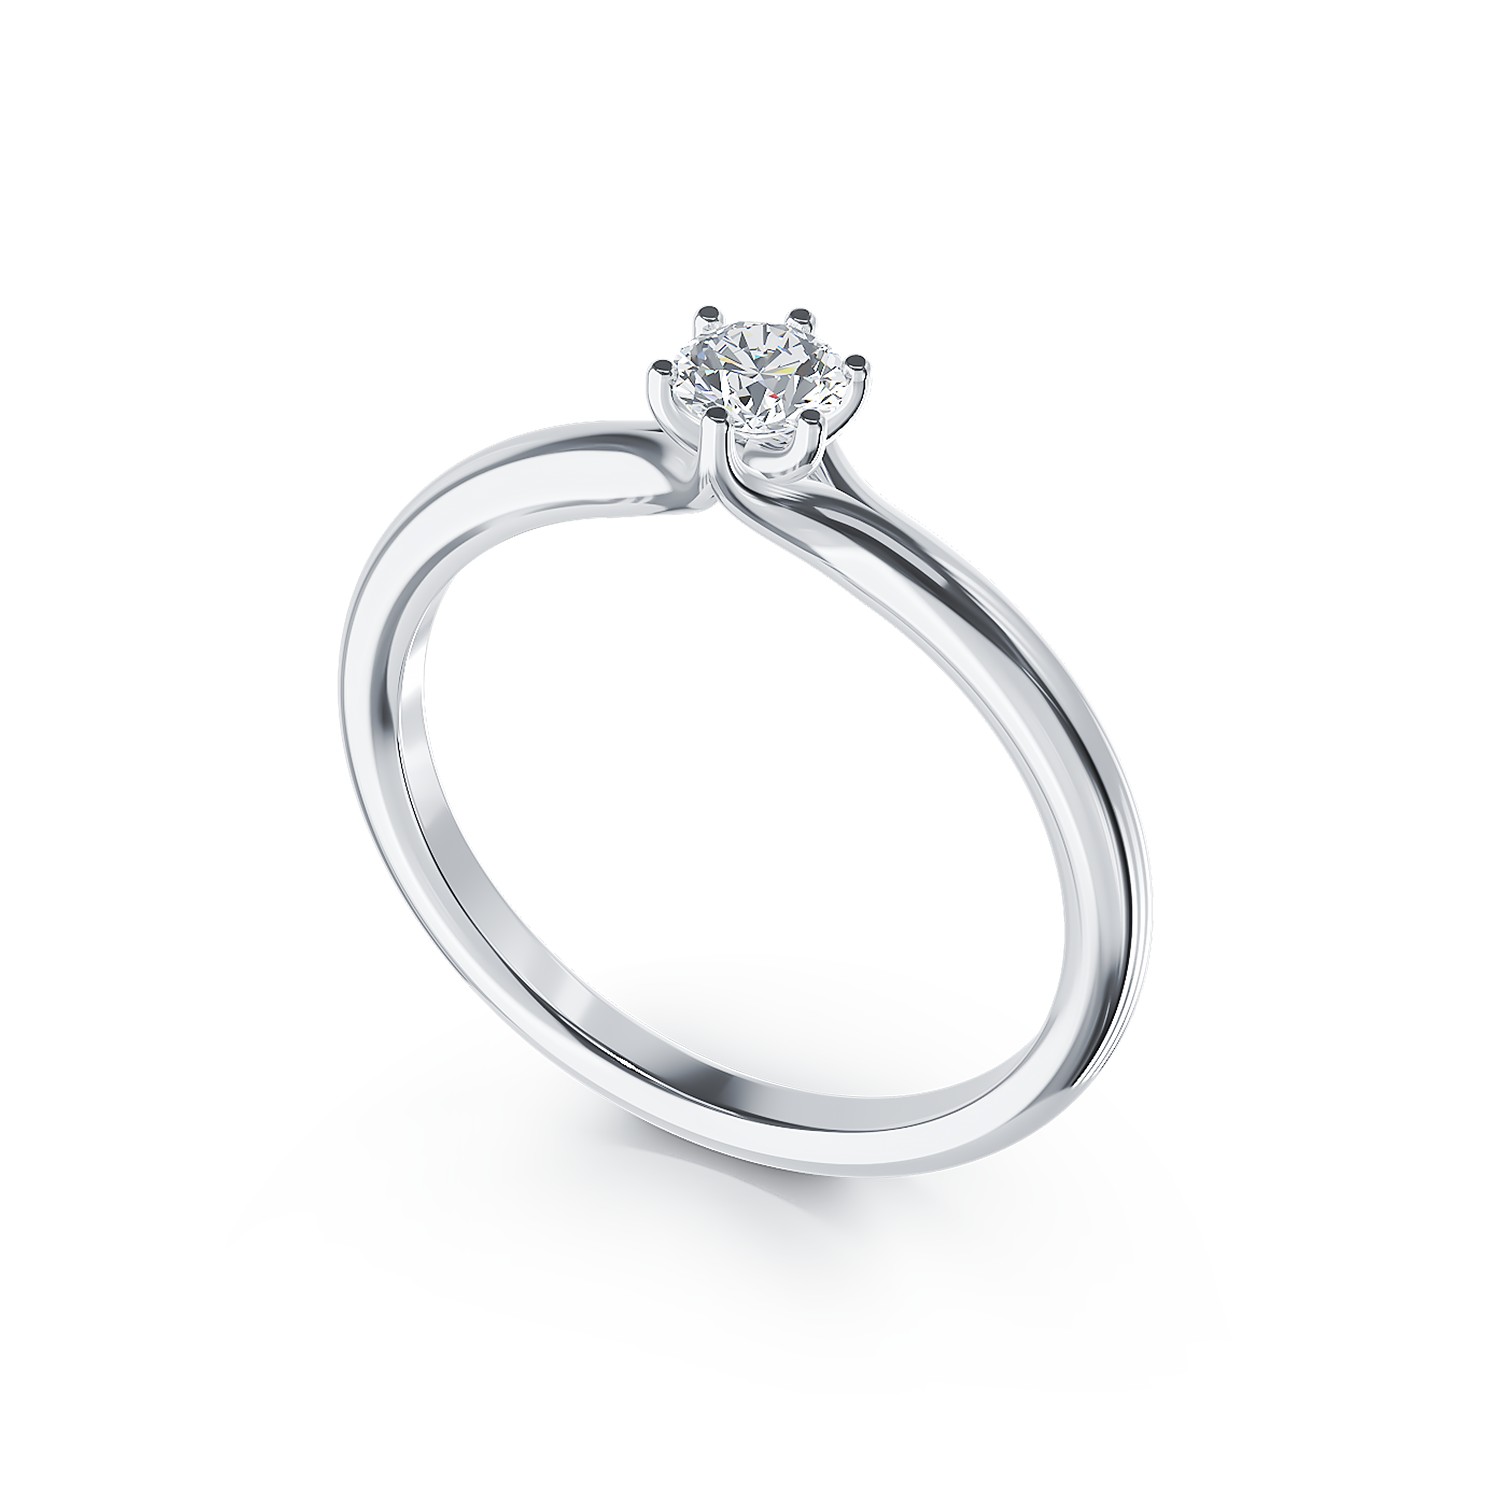 White gold engagement ring with 0.24ct solitaire diamond